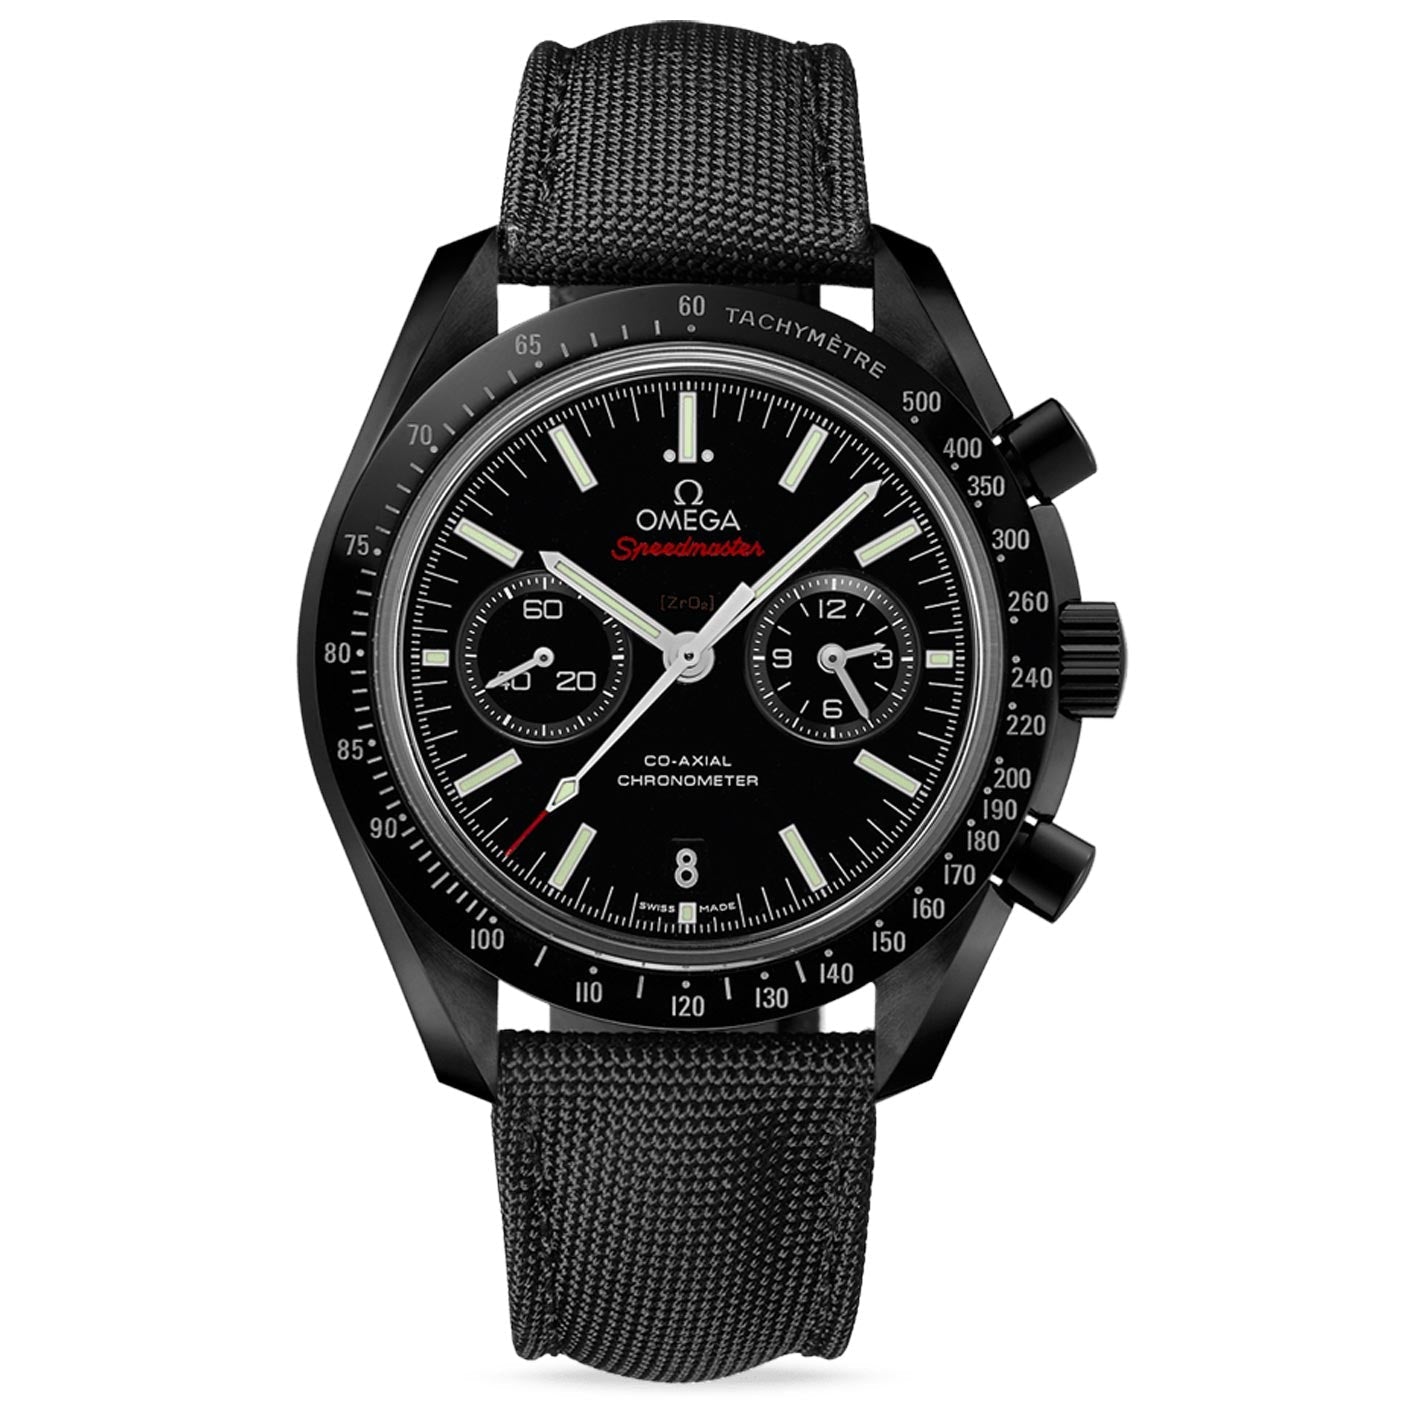 OMEGA Speedmaster Dark Side Of The Moon Co-Axial Chronometer Chronograph 44.25mm Watch Meteorite